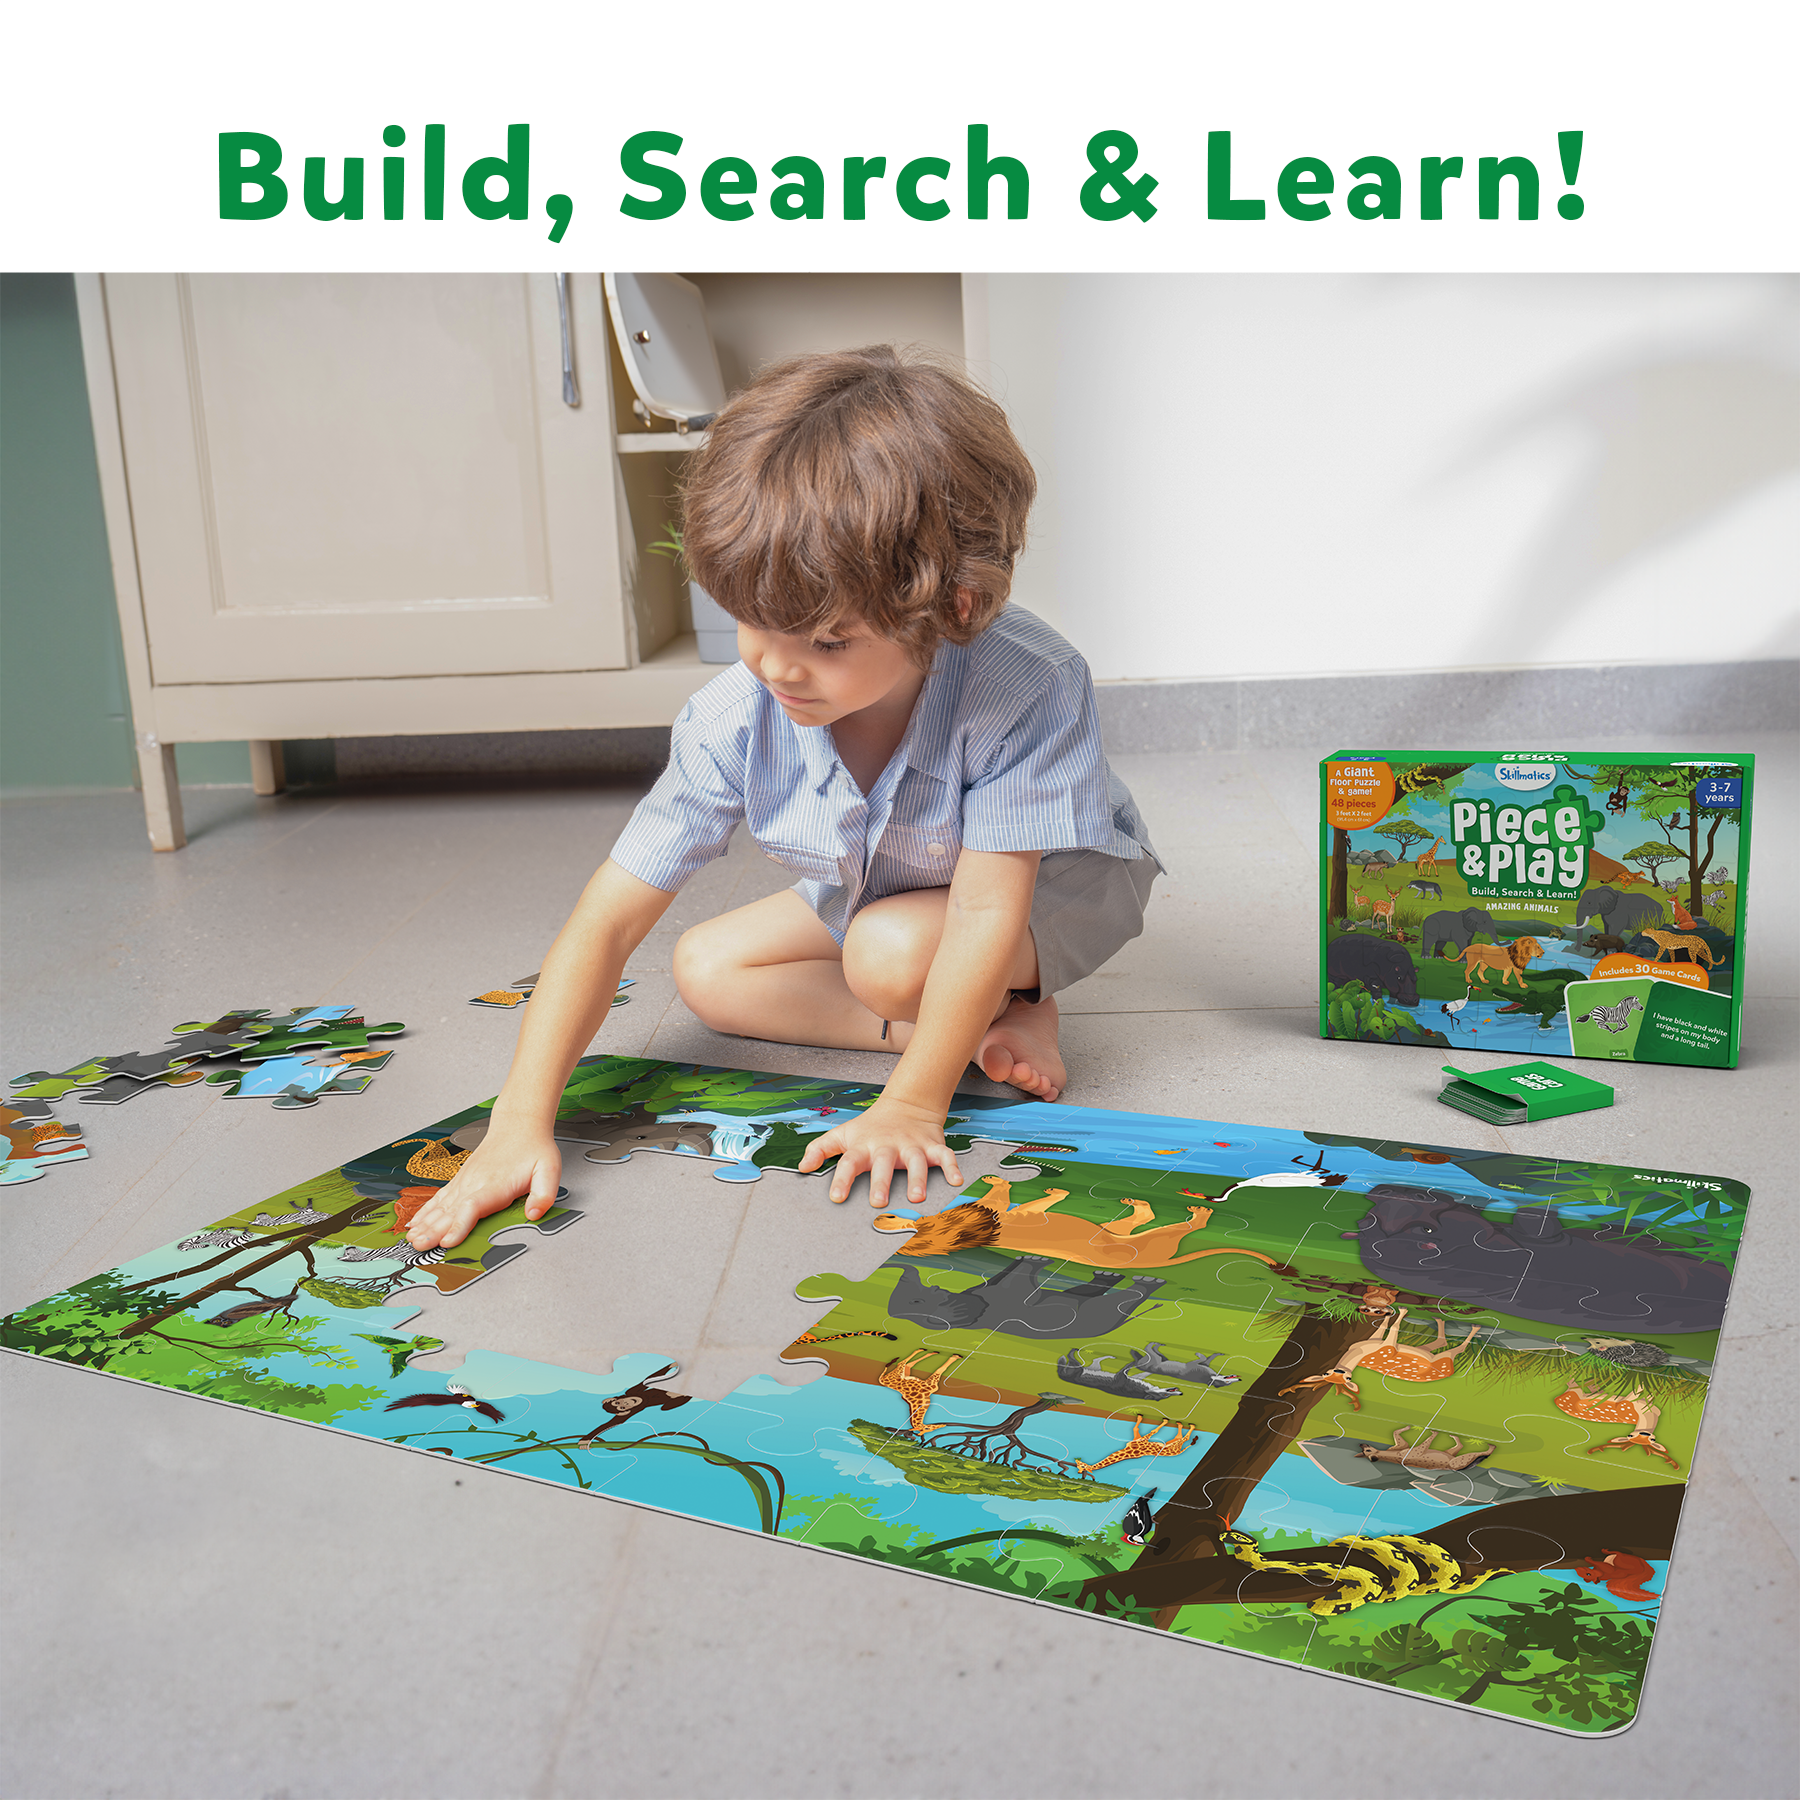 Skillmatics Floor Puzzle & Game - Piece & Play Wild Animals, Jigsaw Puzzle (48 Pieces, 2 X 3 Feet), Ages 3 To 7